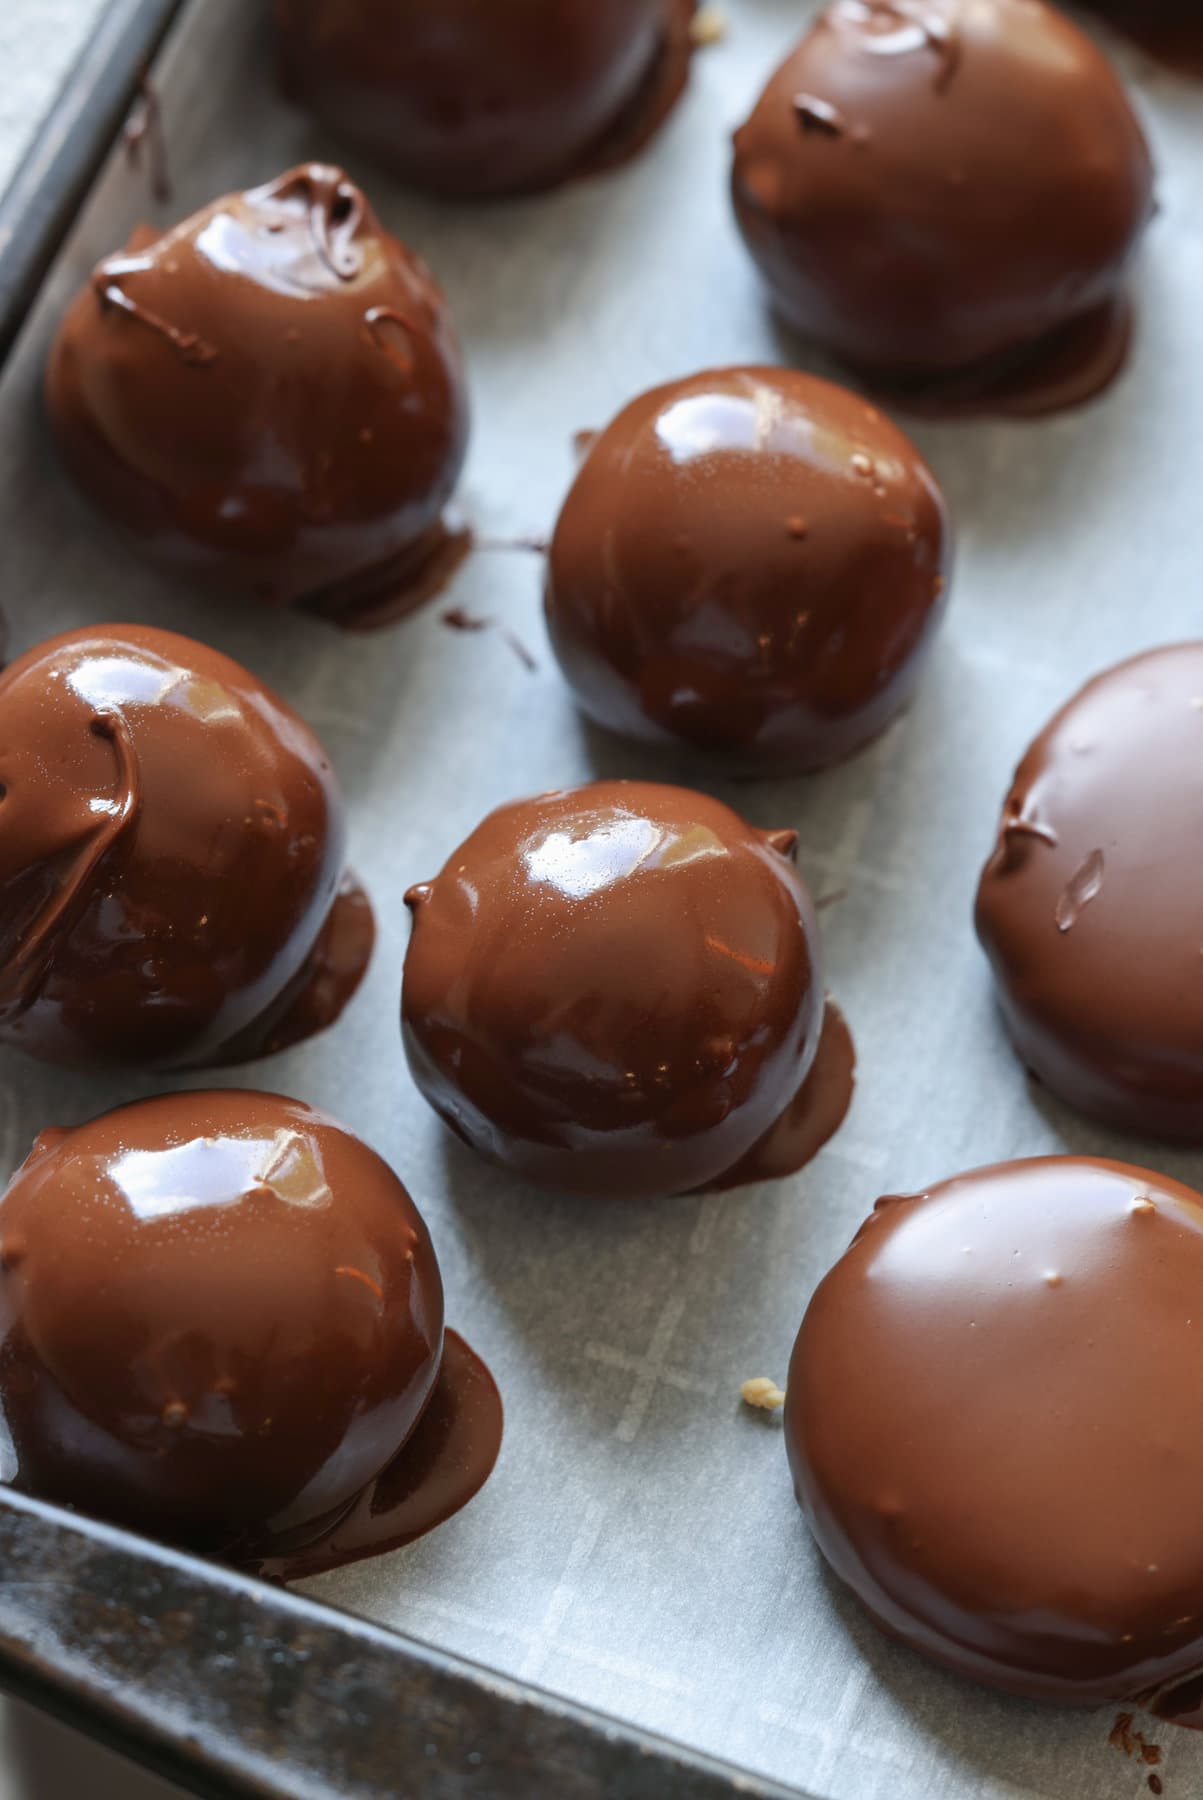 peanut butter balls still glossy after being dipped melted chocolate